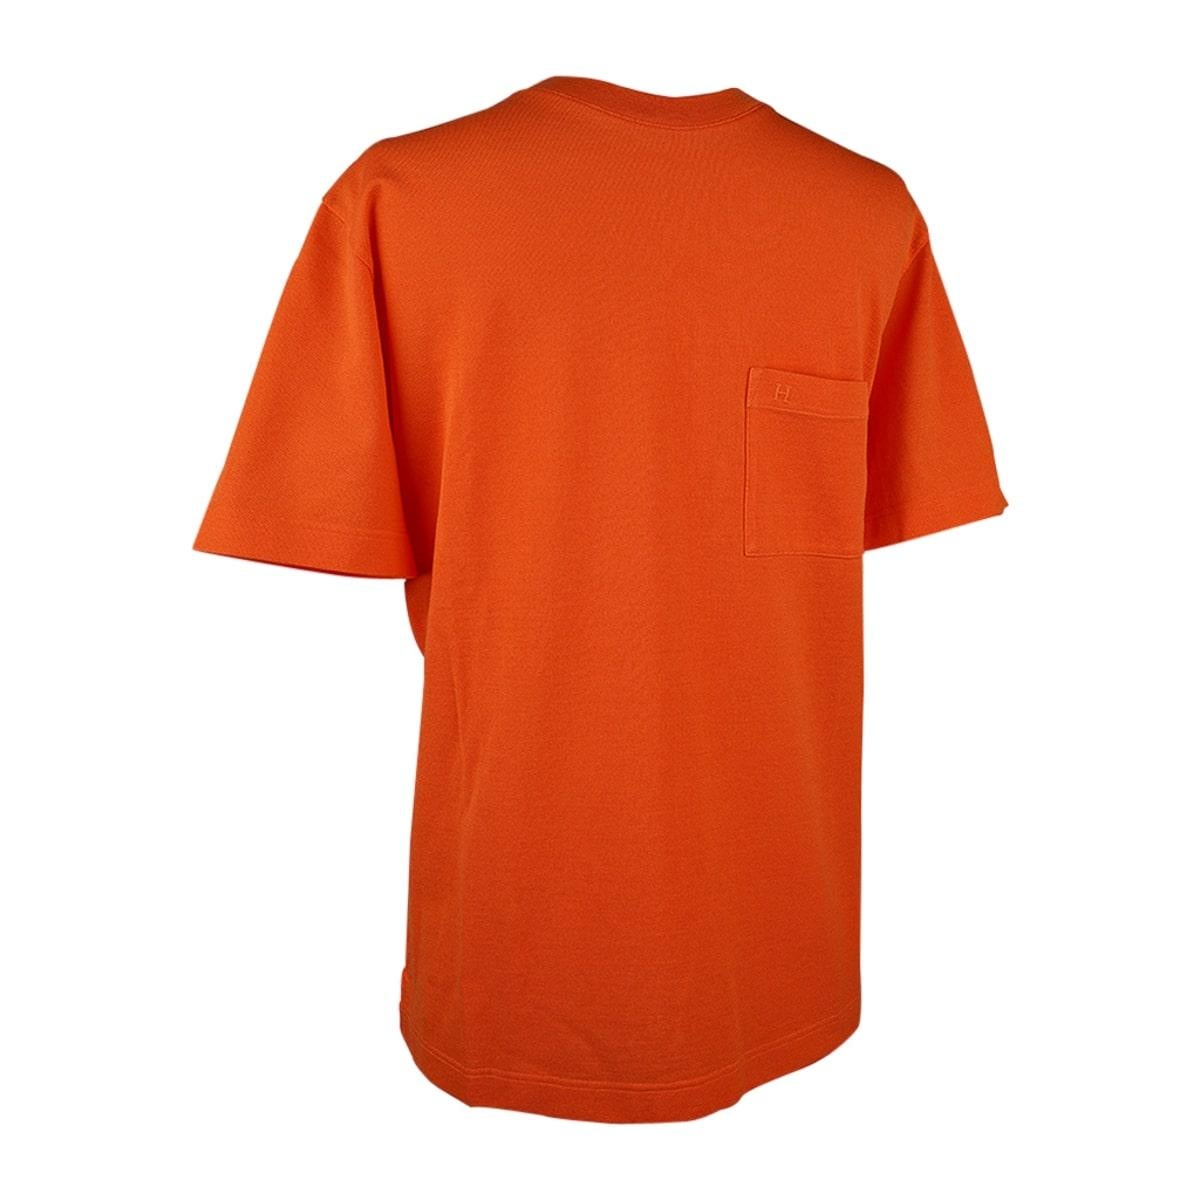 Hermes Ras du Cou (Crewneck) T-Shirt featured in Orange.
Embroidered H on breast pocket.
Short sleeve T with crew neck.
Notched at hem.
Fabric is pique cotton.
NEW or NEVER WORN.
final sale

SIZE M

TOP MEASURES:
LENGTH 28